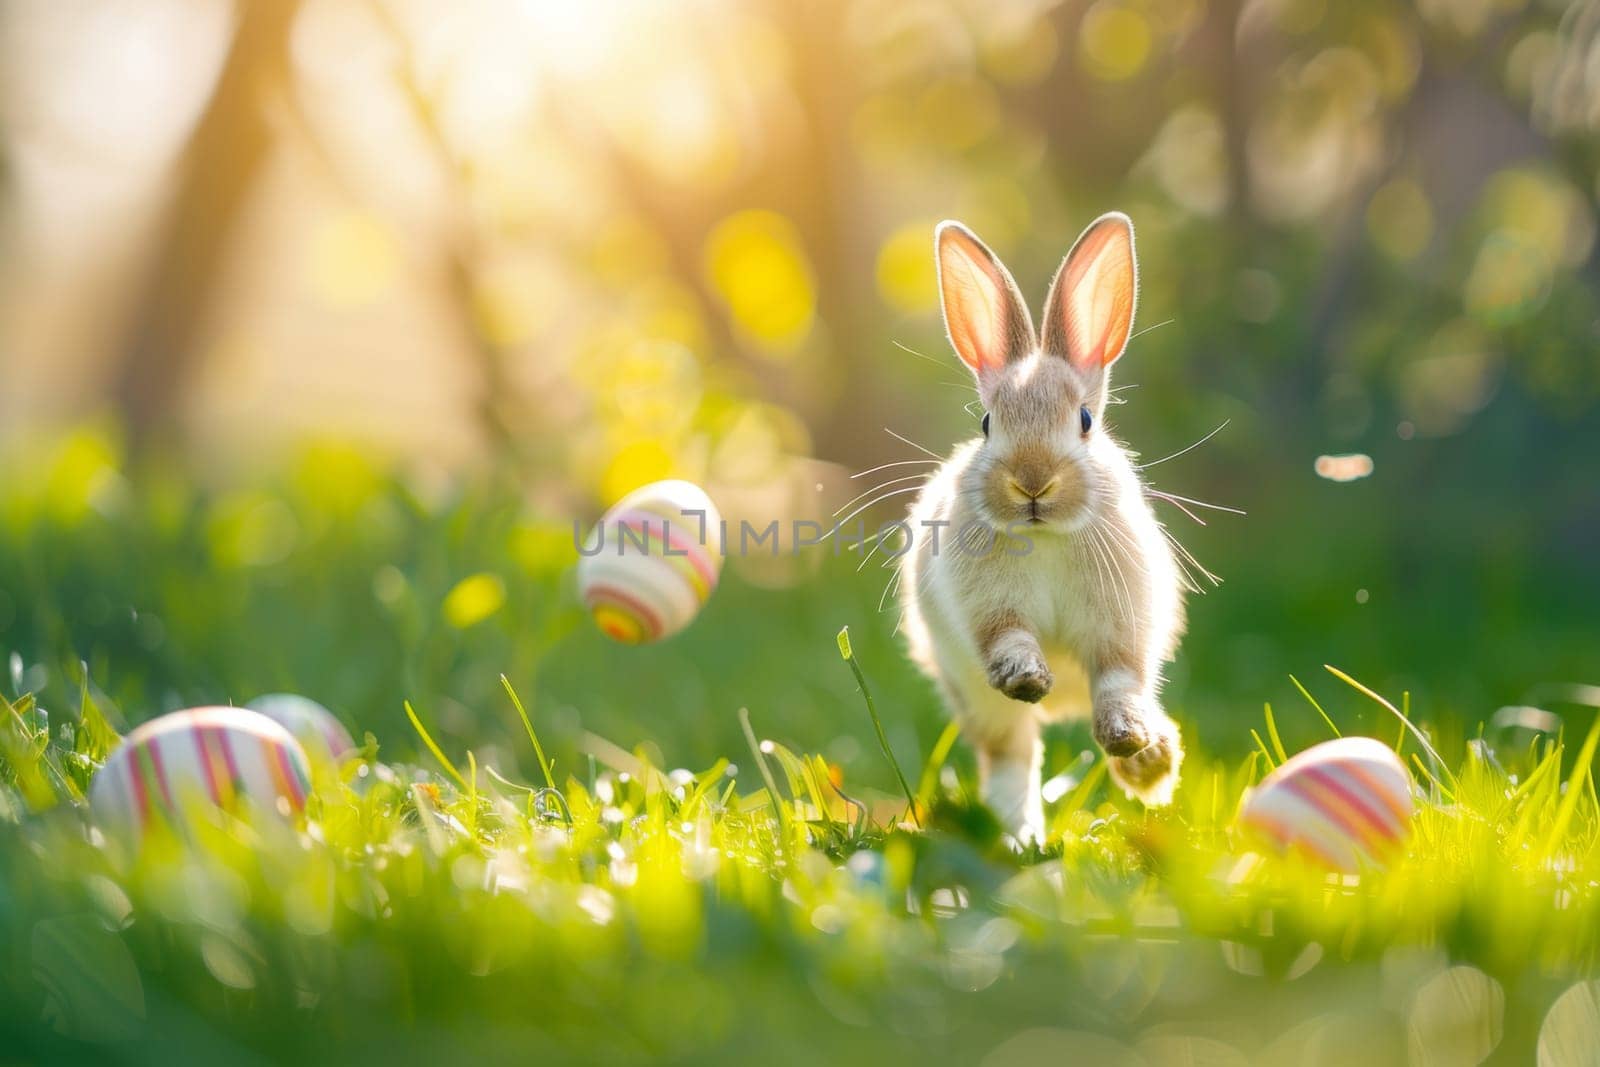 A rabbit is running through a field of grass with a few eggs scattered around it by nateemee